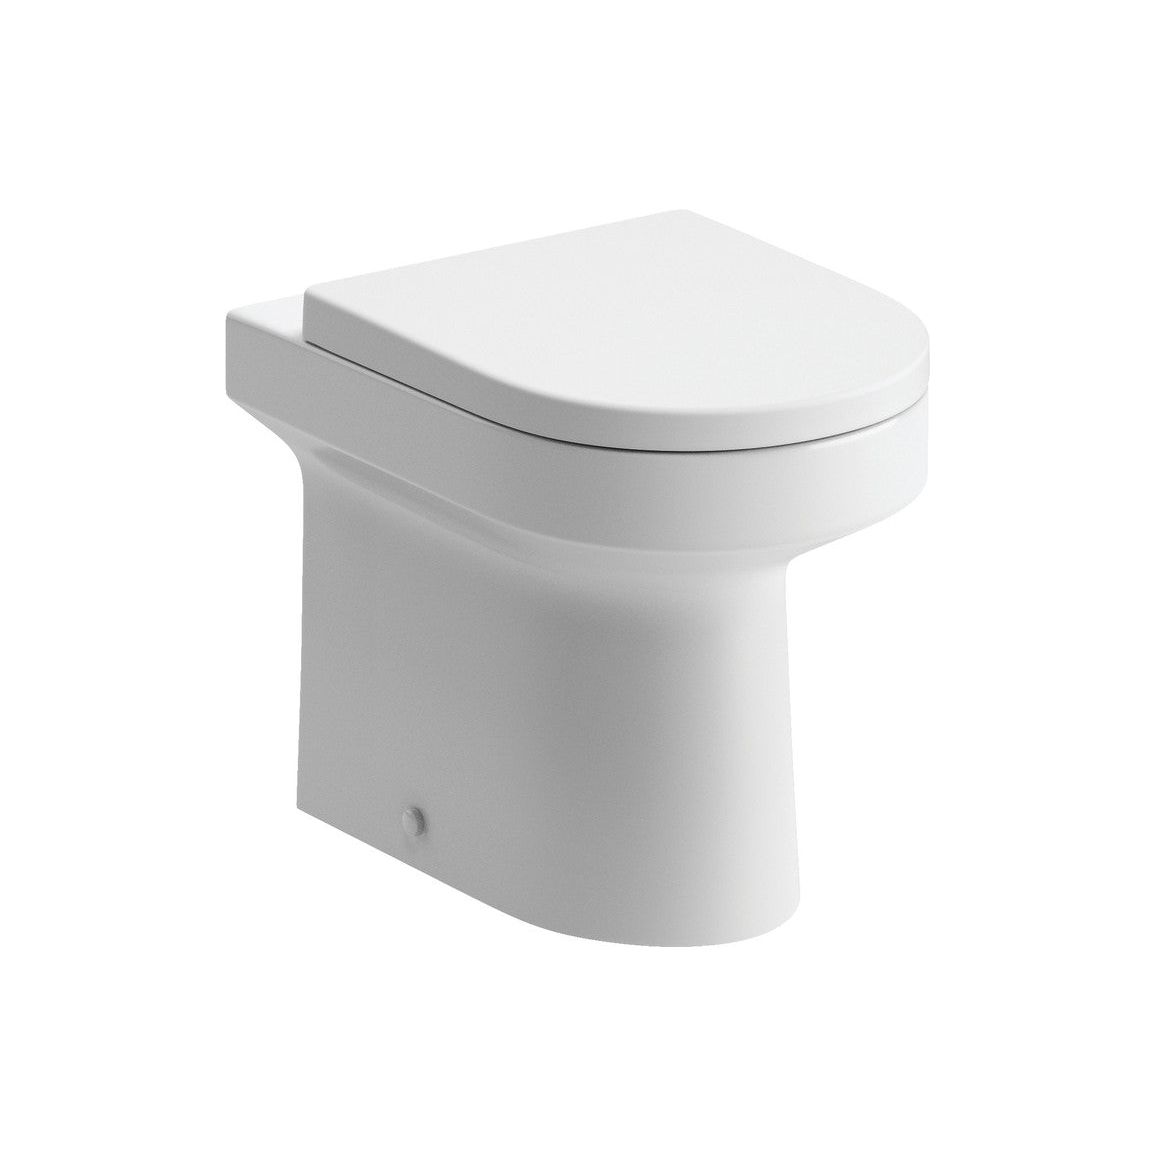 Floyer Soft Close Seat - White Weight